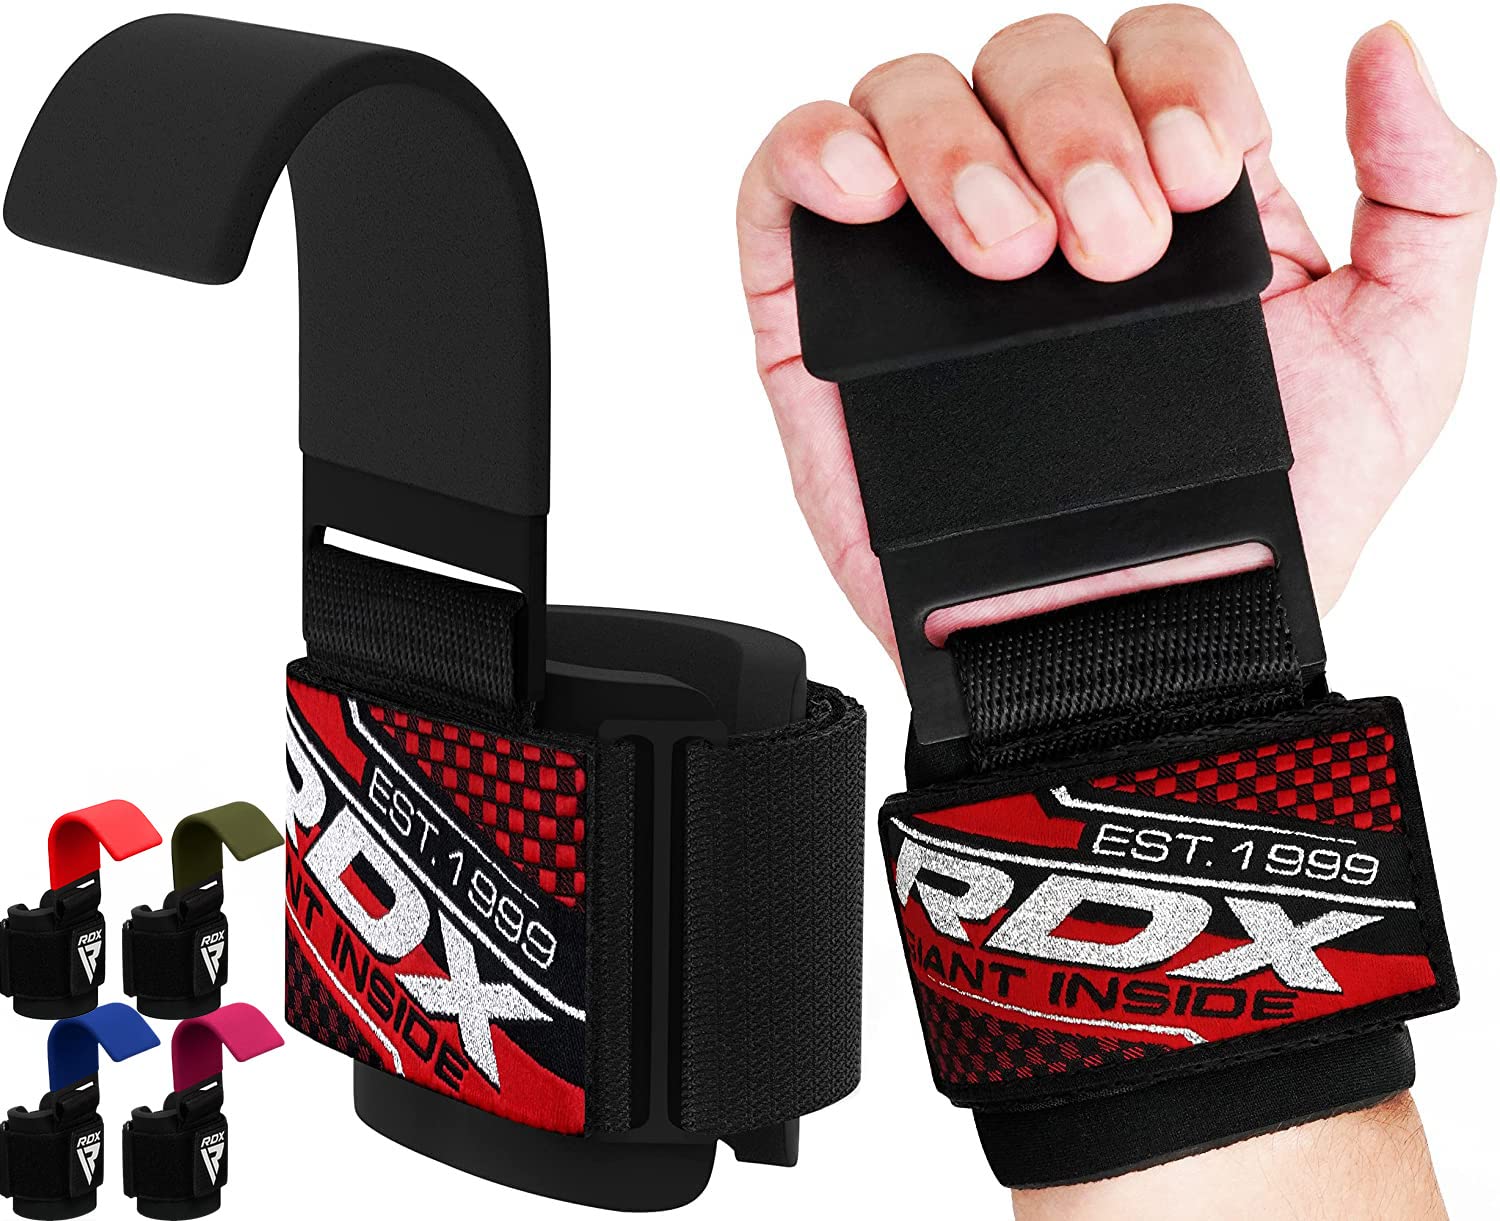 RDX Weight Lifting Hooks, Non-Slip Rubber Coated Grips, 8mm Neoprene Wrist Support Padding, Powerlifting Barbell Rows Deadlifts Chin Pull Up Fitness Strength Training Straps, Gym Bodybuilding Workout